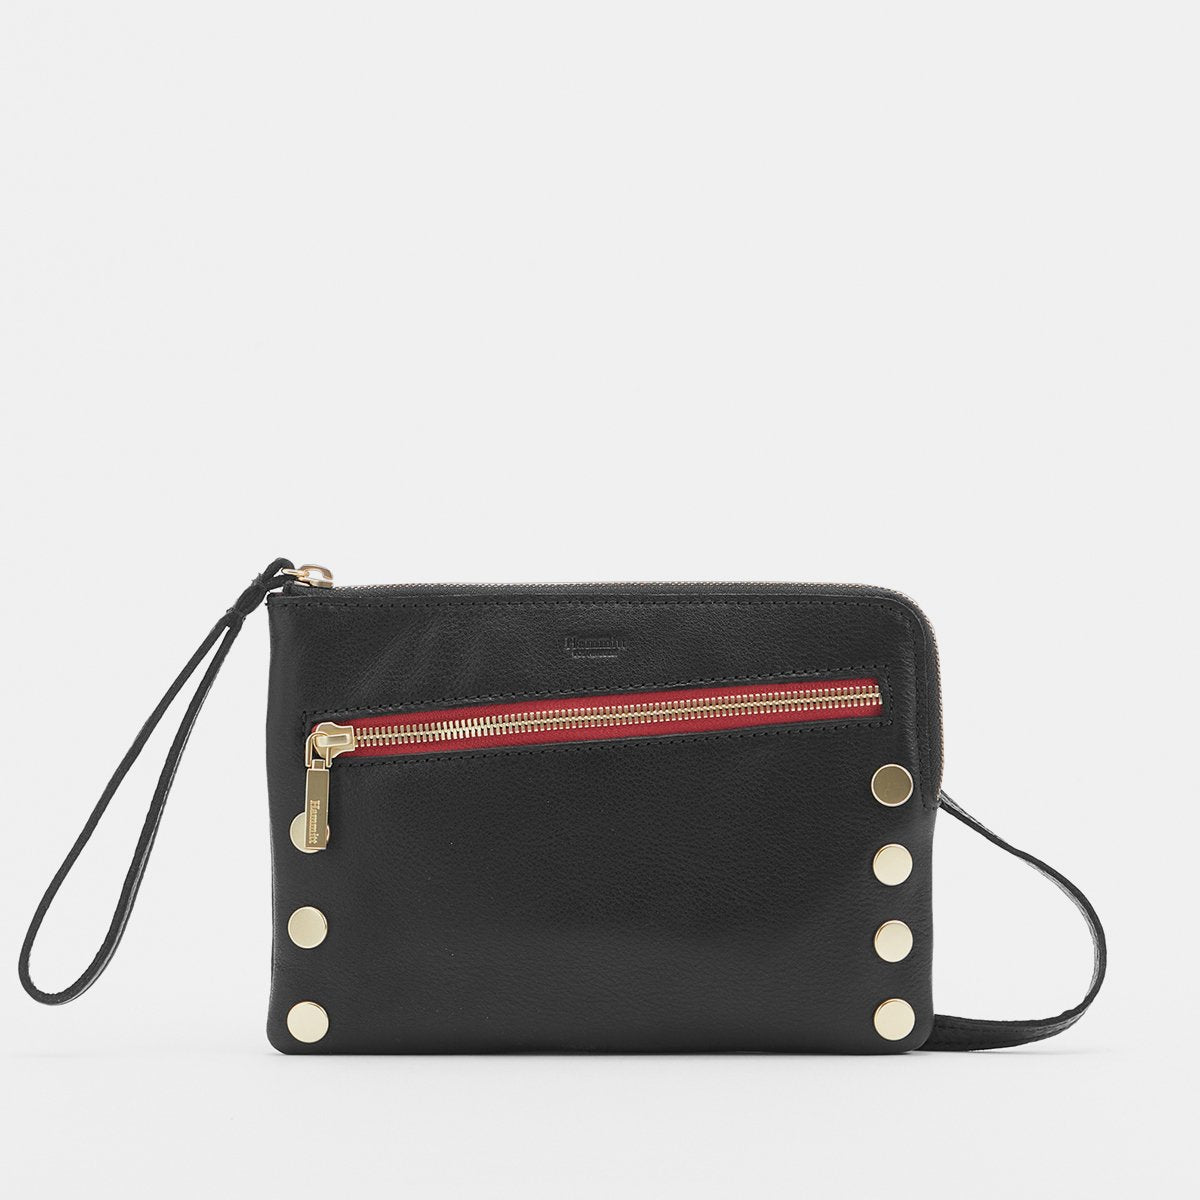 Nash 2, Small - Black / Brushed Gold / Red Zip